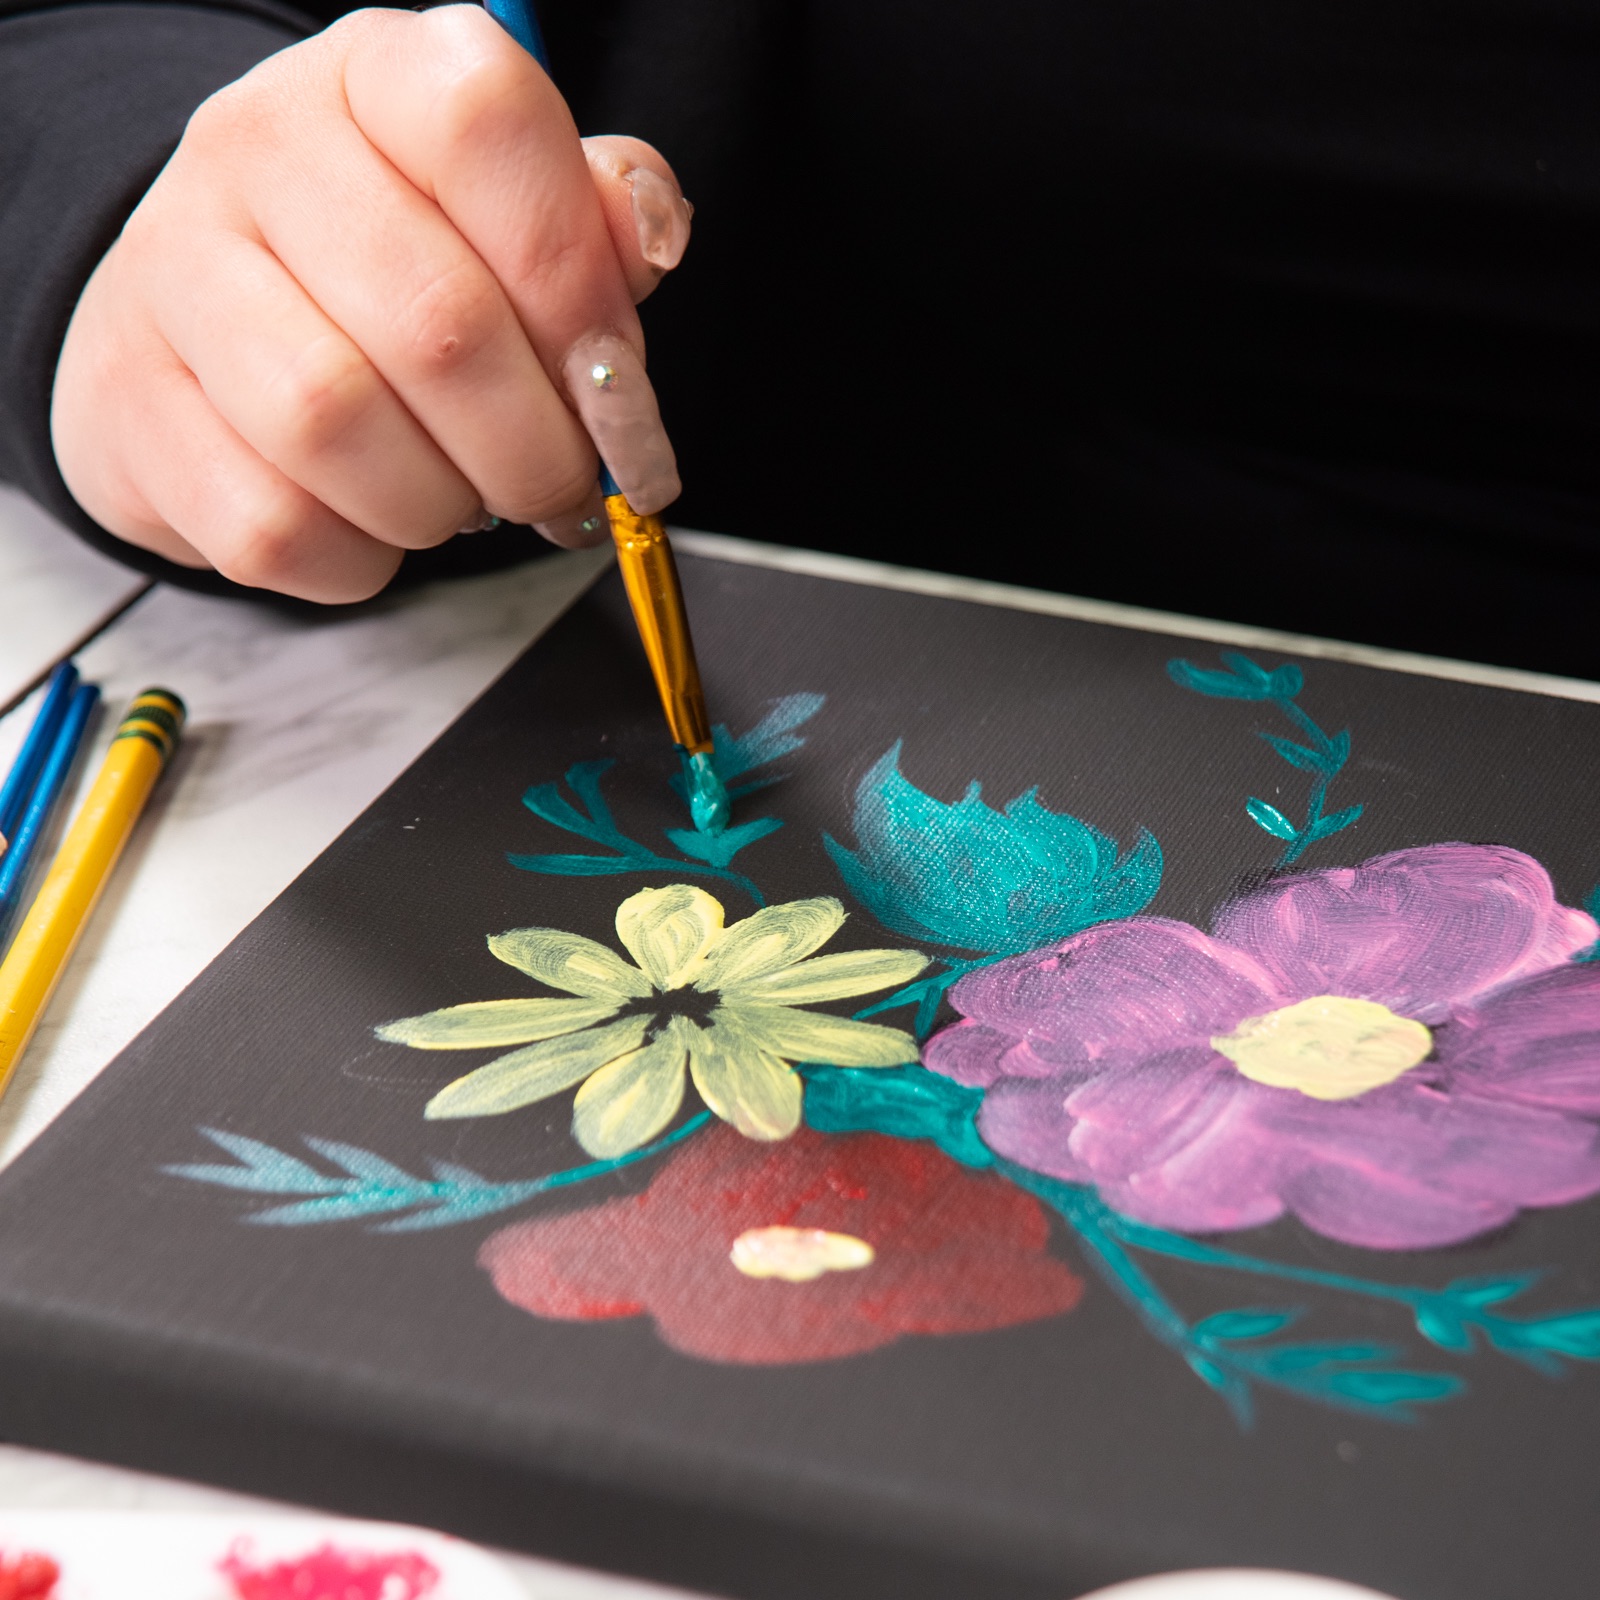 painting the leaves of the flowers